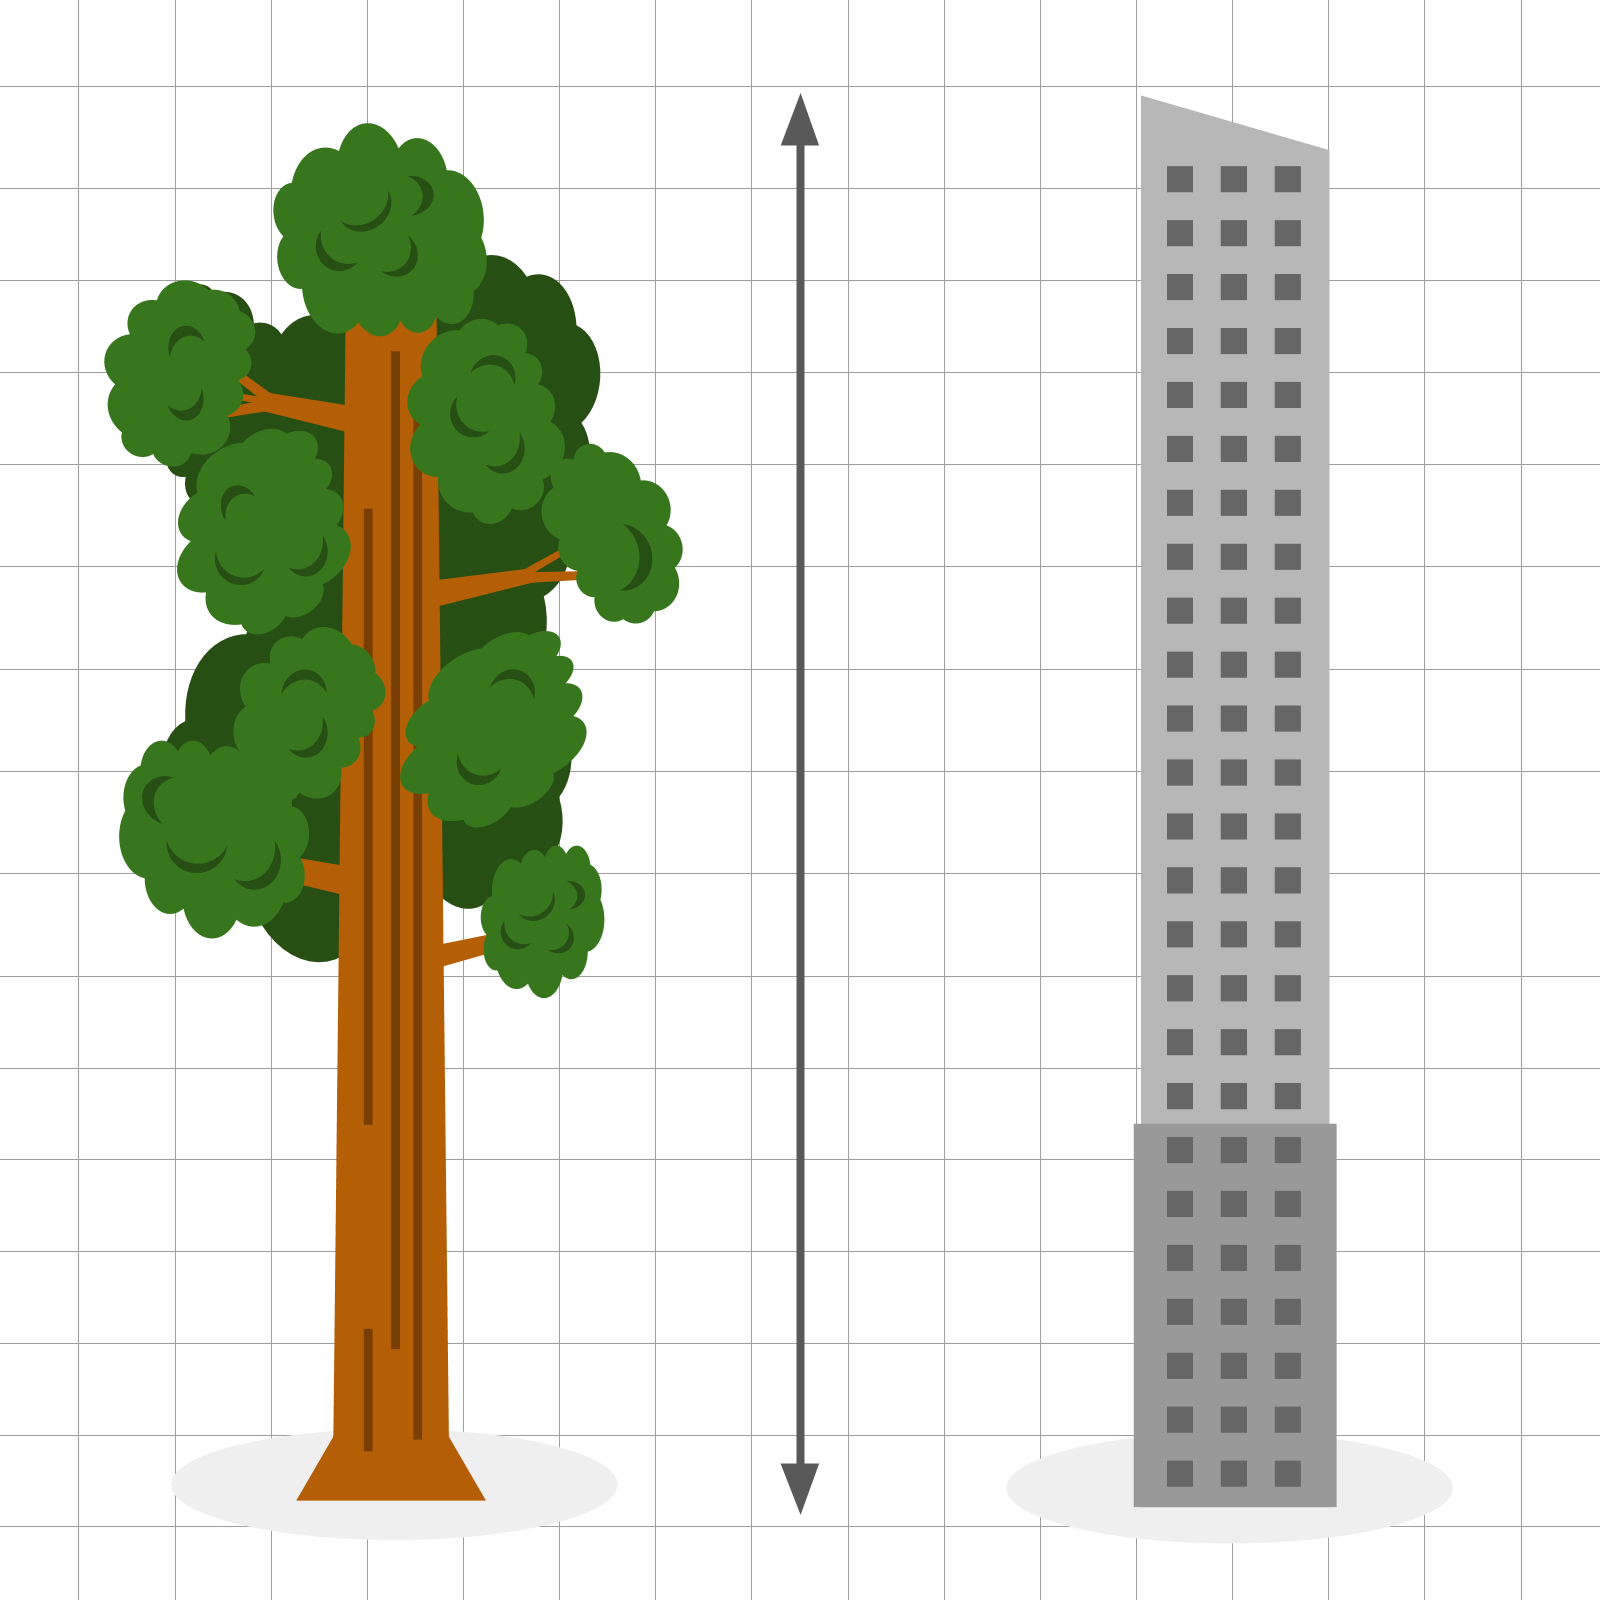 Shapegrams 12: Giant Sequoia and Building